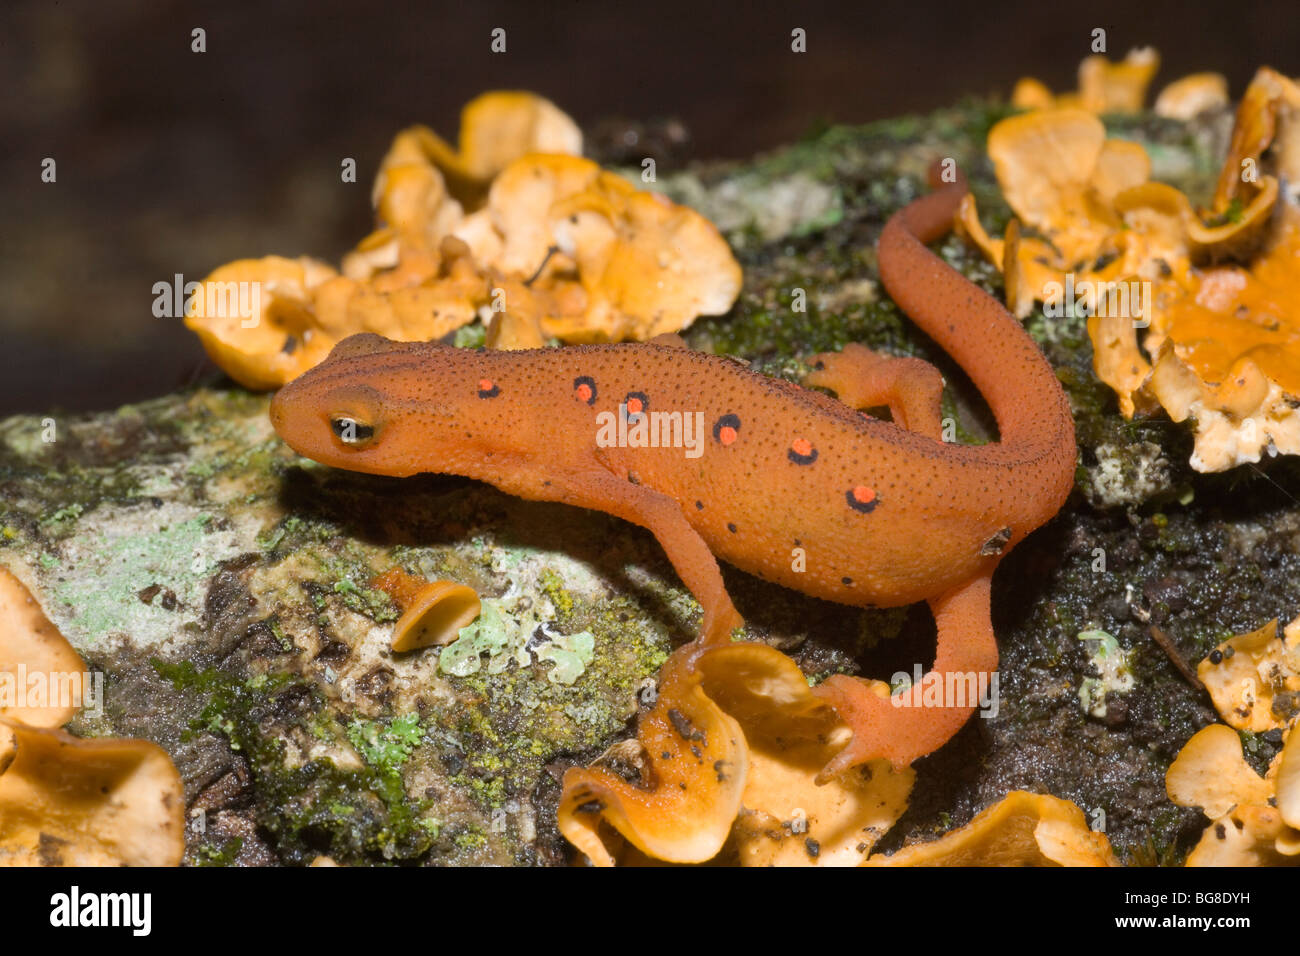 Red Eft or Newt Notophthalmus vividescens terrestrial form USA North America Stock Photo